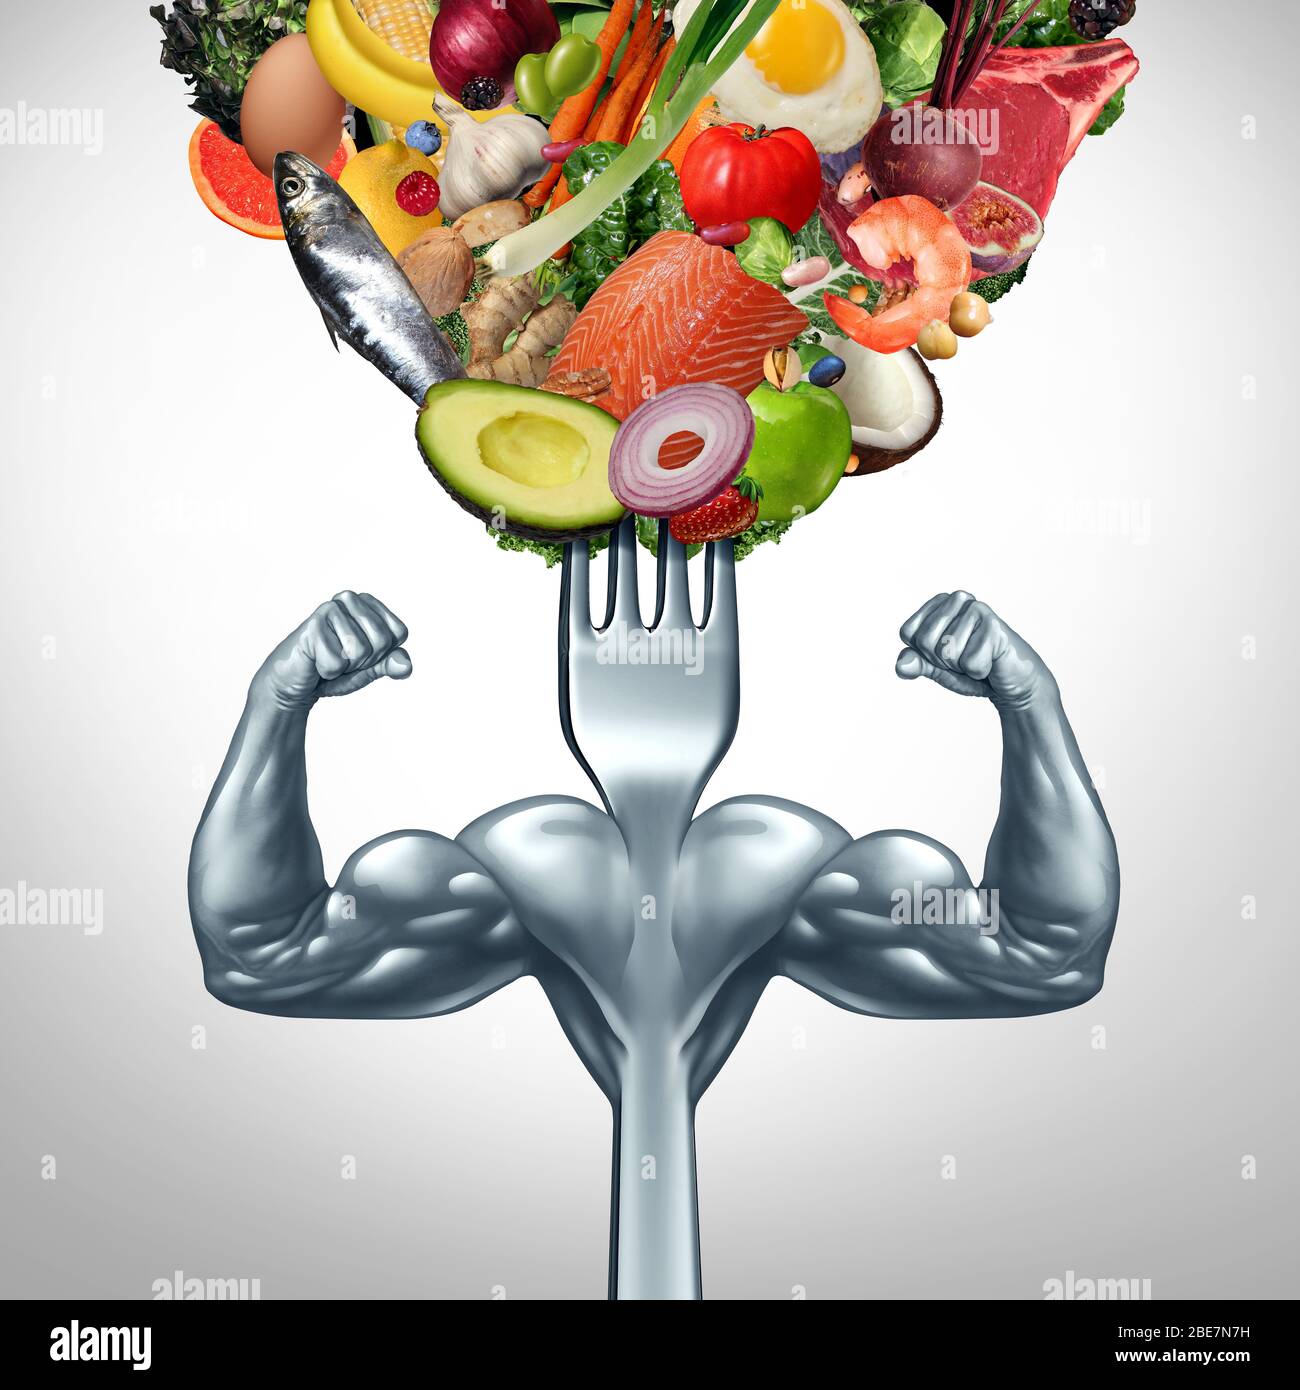 Powerful food and power eating symbol for strenght workout or working out with nutritional supplement as a healthy fit lifestyle as a fork. Stock Photo